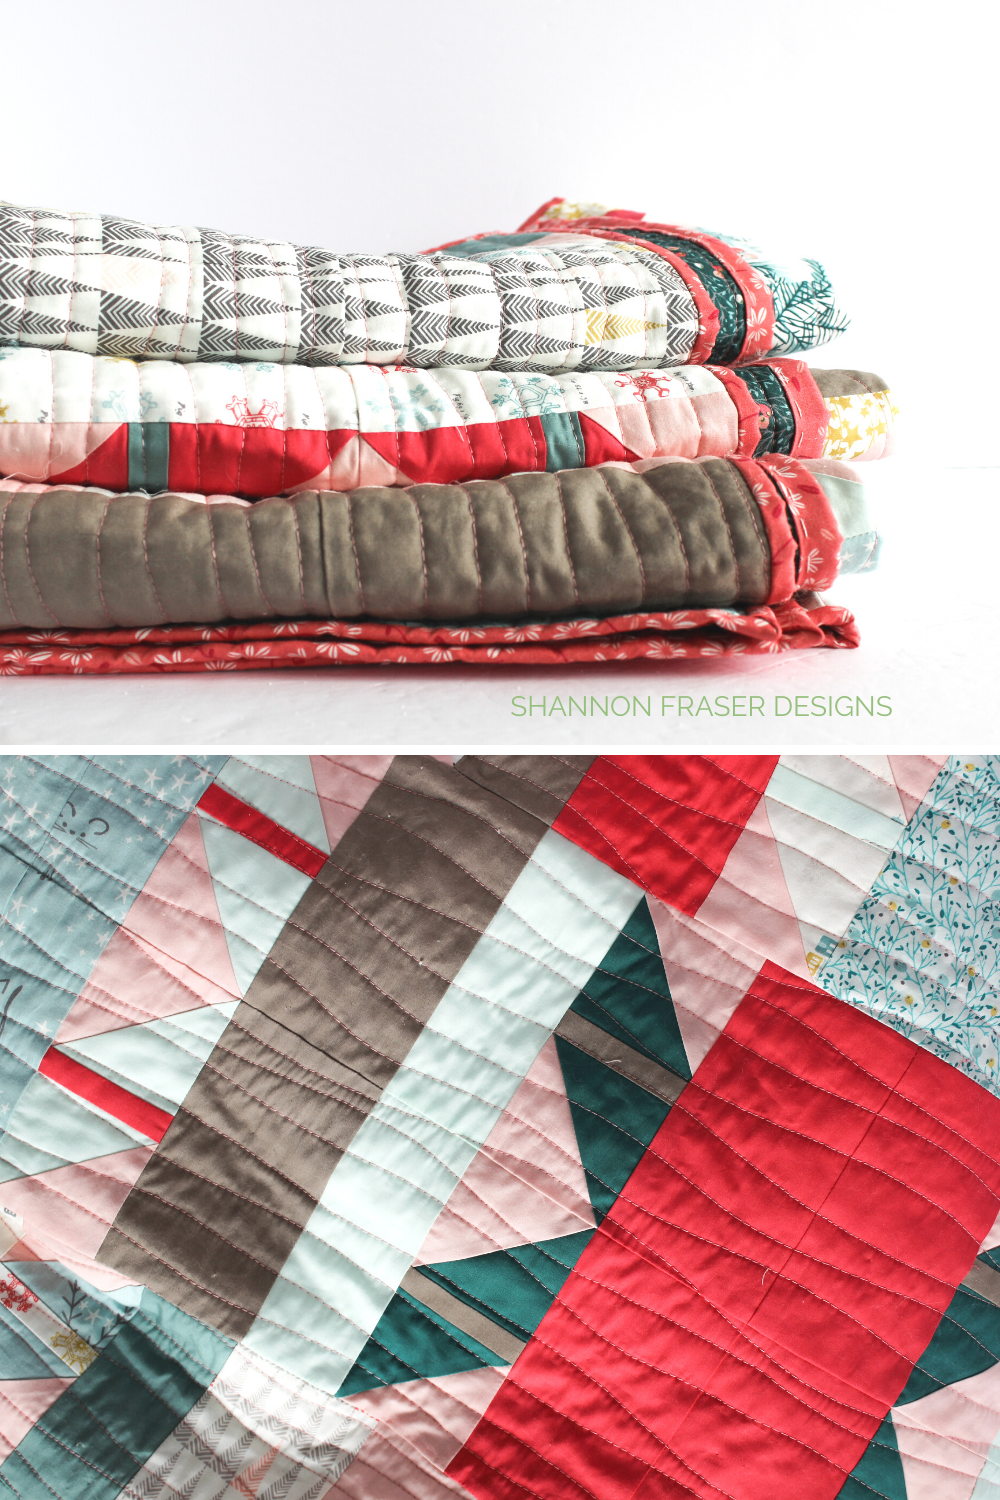 Organic wavy line quilting details on the Shattered Star quilt - holiday version featuring Art Gallery Fabrics | Shattered Star Modern Quilt Pattern | Shannon Fraser Designs #machinequilting